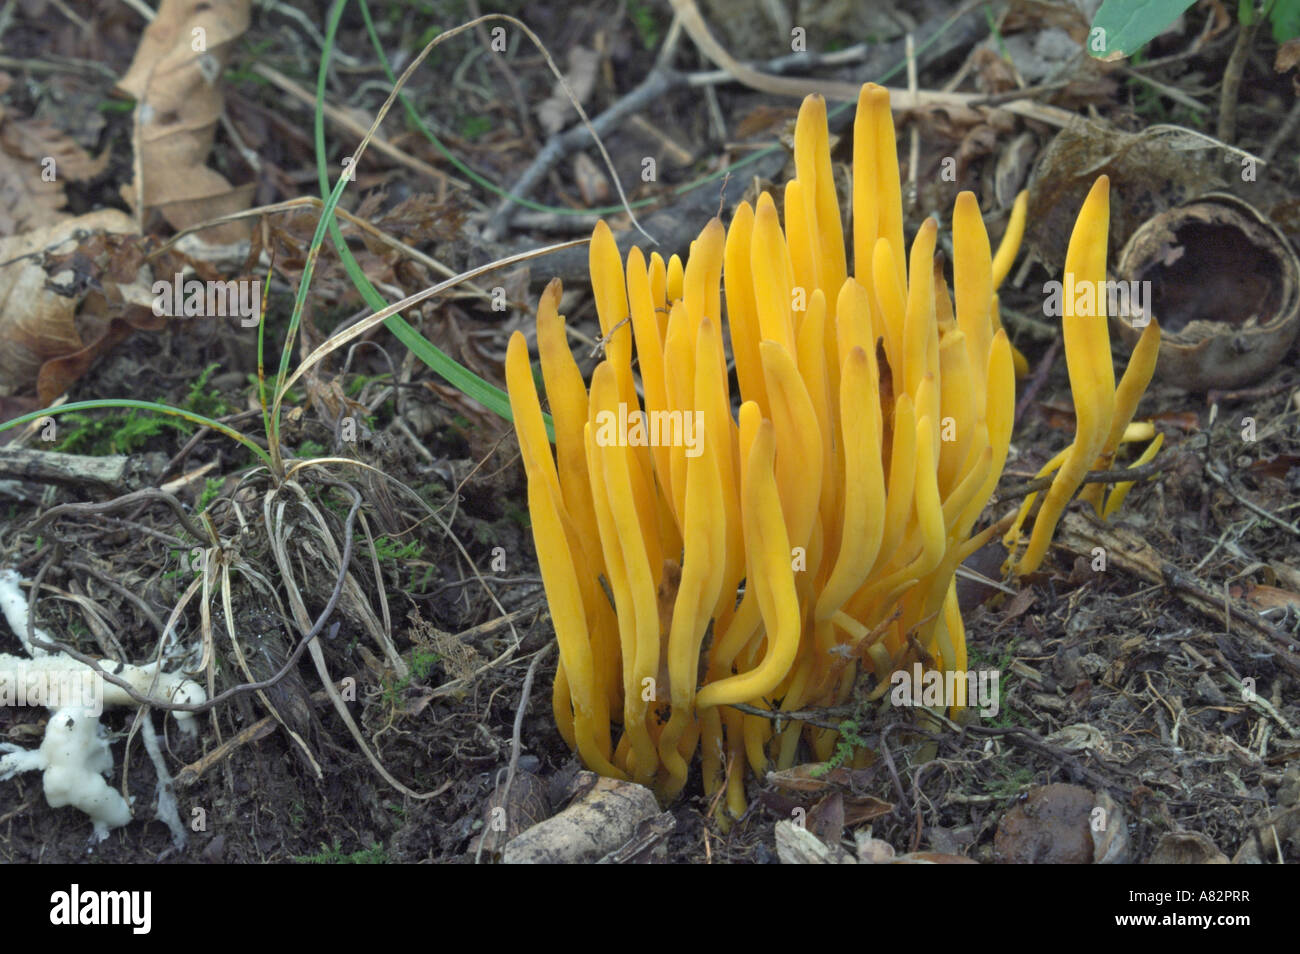 Yellow Spindle coral fungus (Clavulinopsis fusiformis) Stock Photo